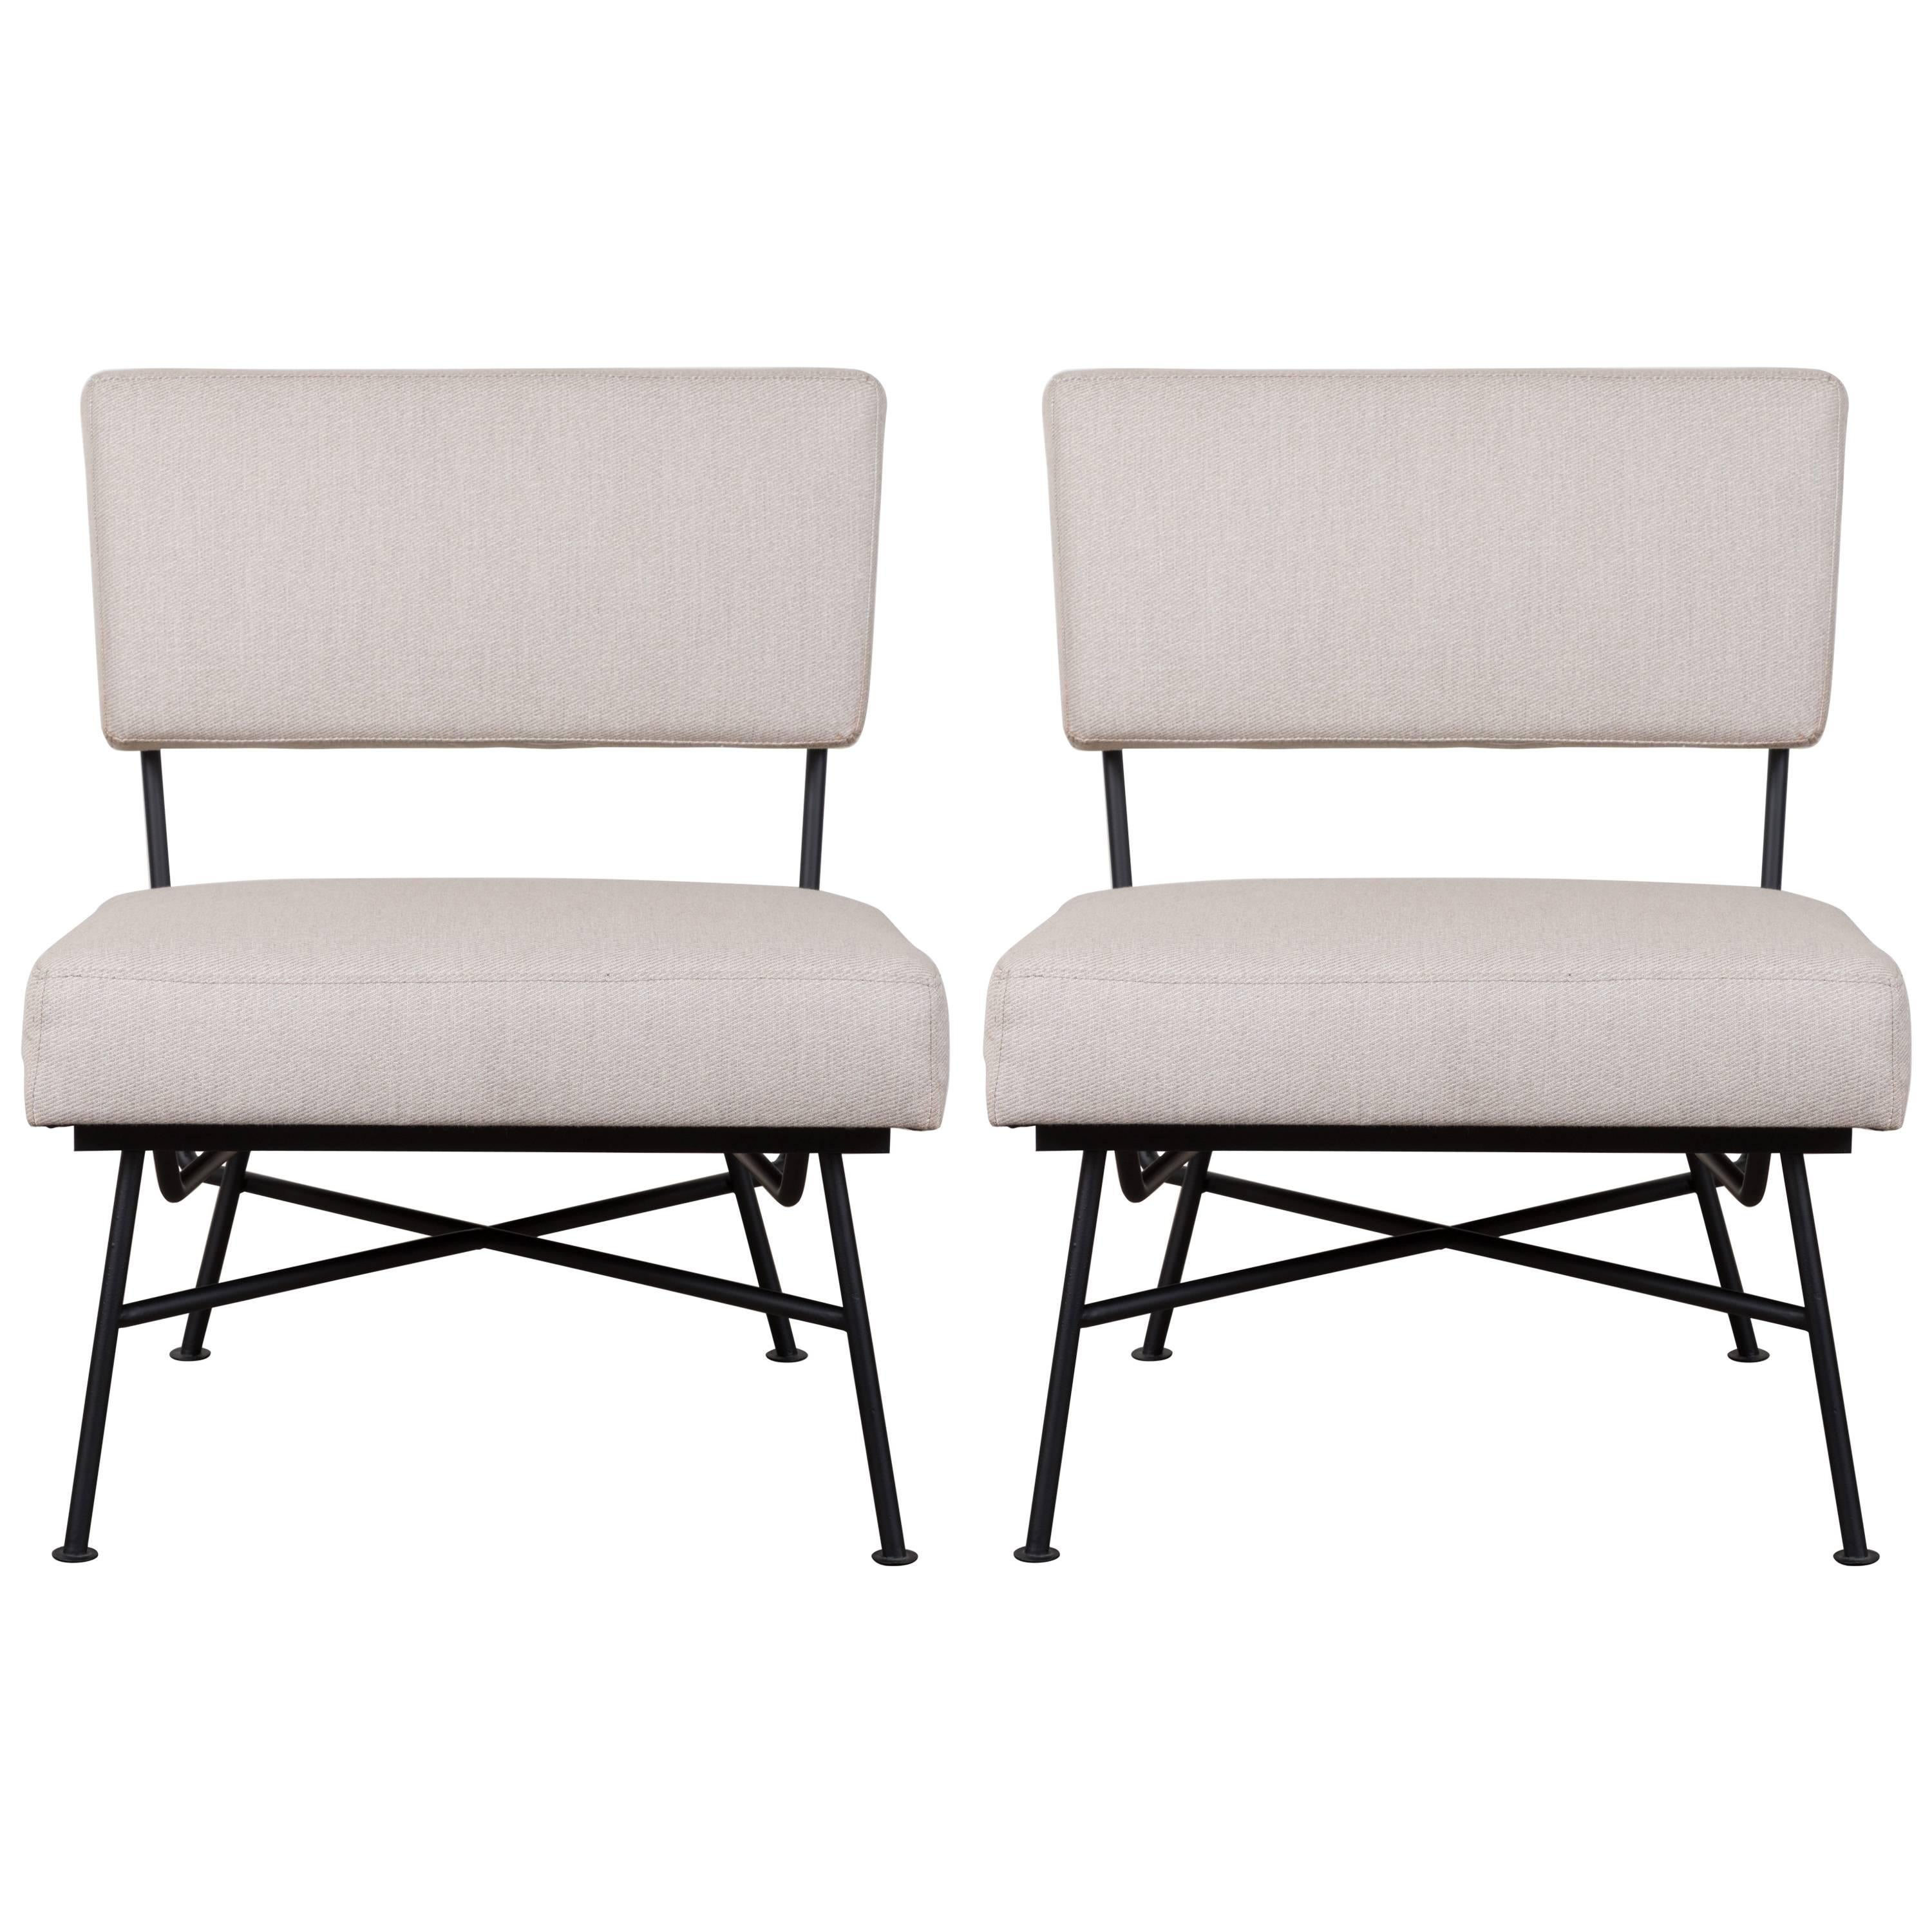 Pair of Montrose Chairs by Lawson-Fenning